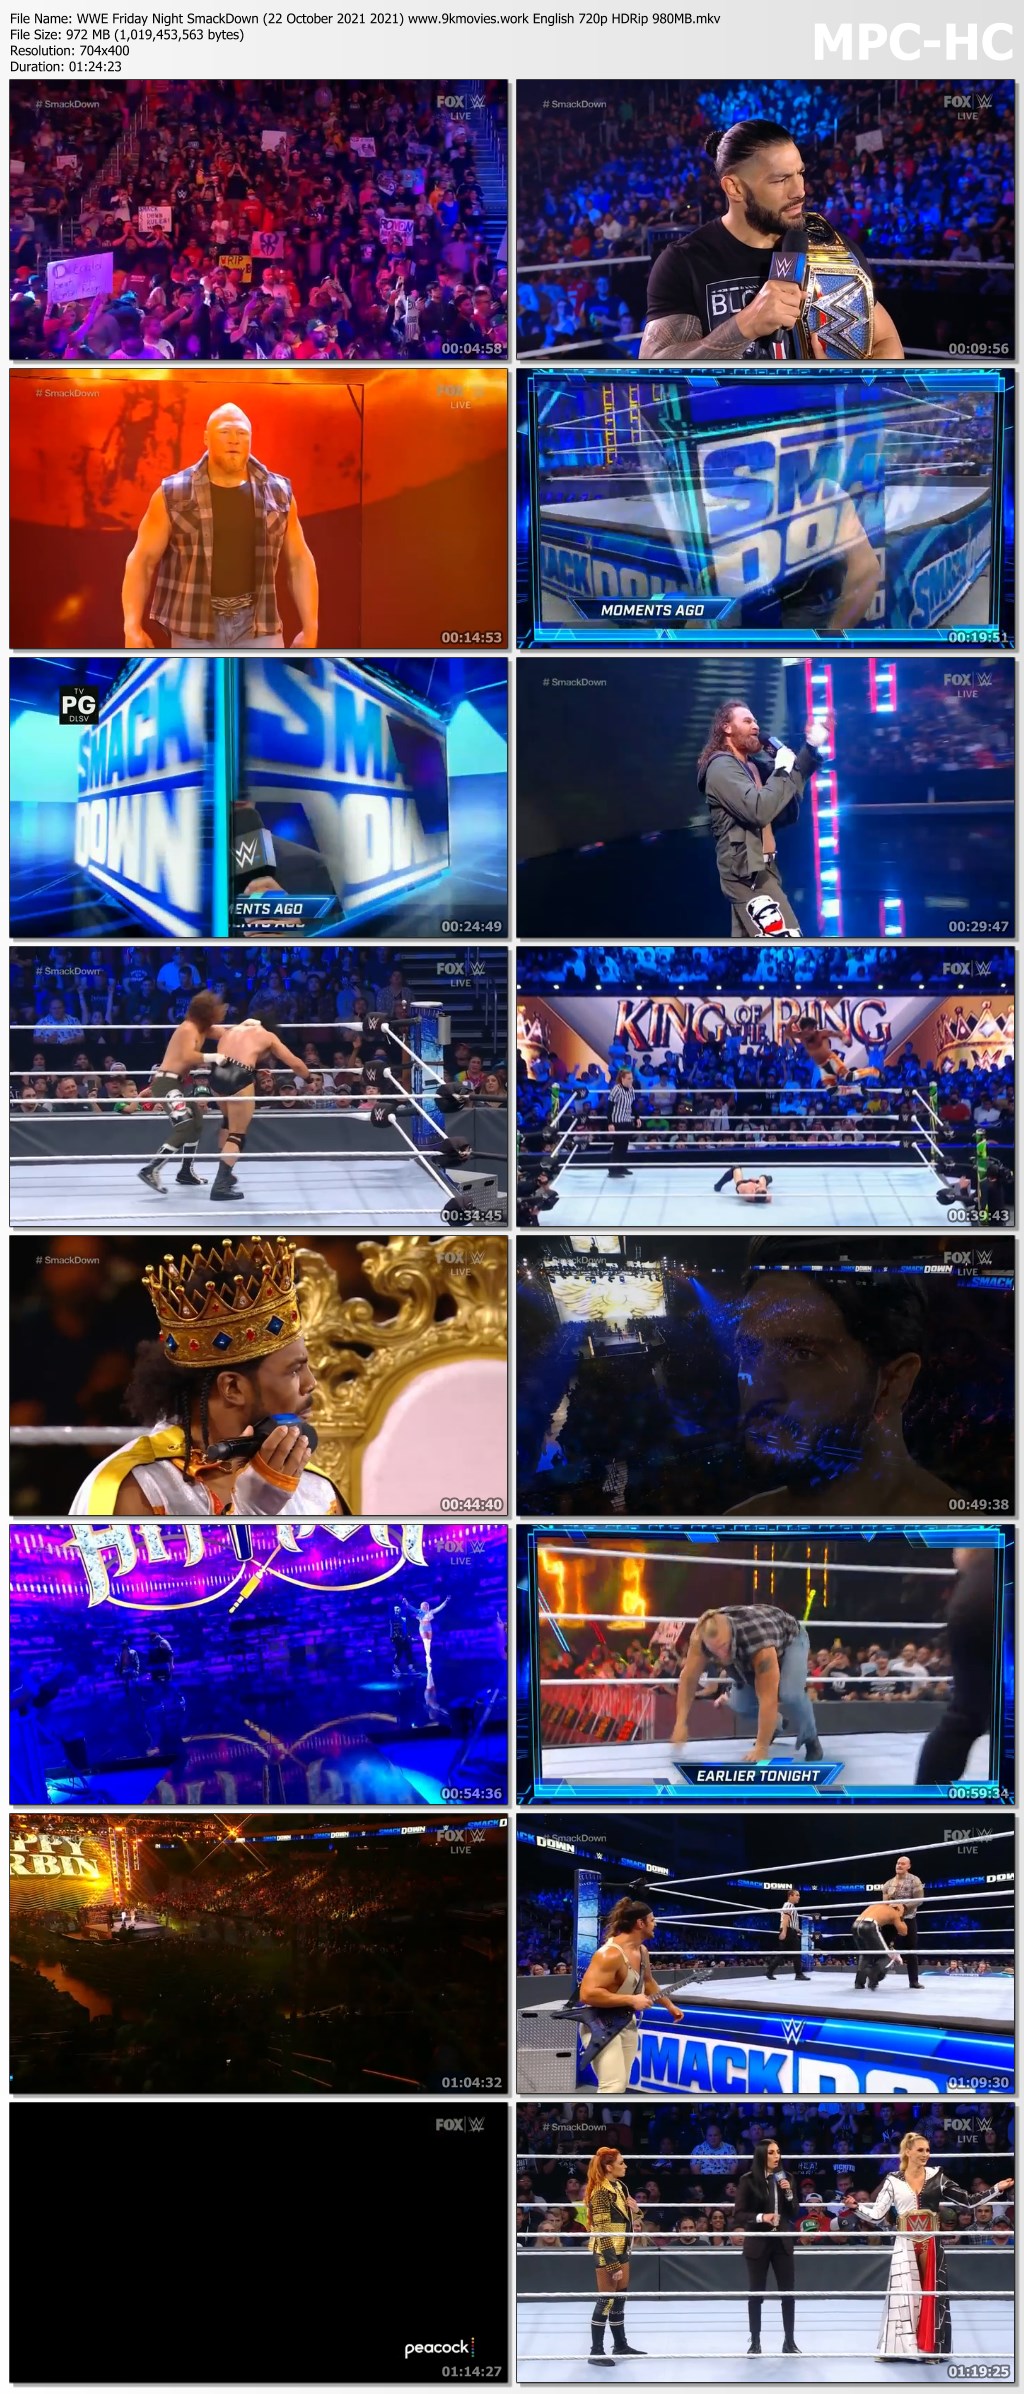 WWE Friday Night SmackDown 22 October 2021 2021 www.9kmovies.work English 720p HDRip 980MB.mkv thumbs720d55d70a5433a7